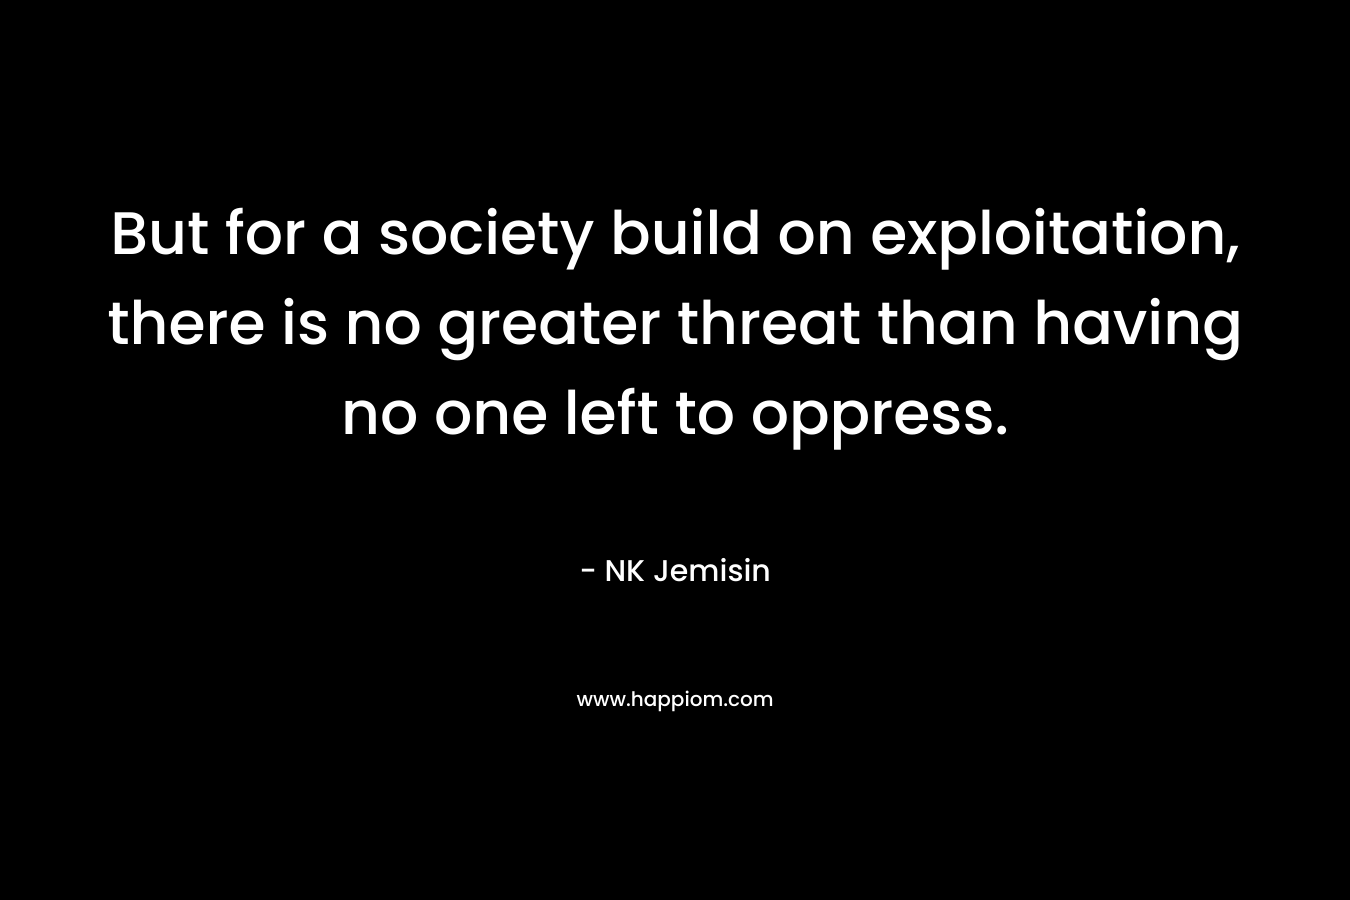 But for a society build on exploitation, there is no greater threat than having no one left to oppress. – NK Jemisin